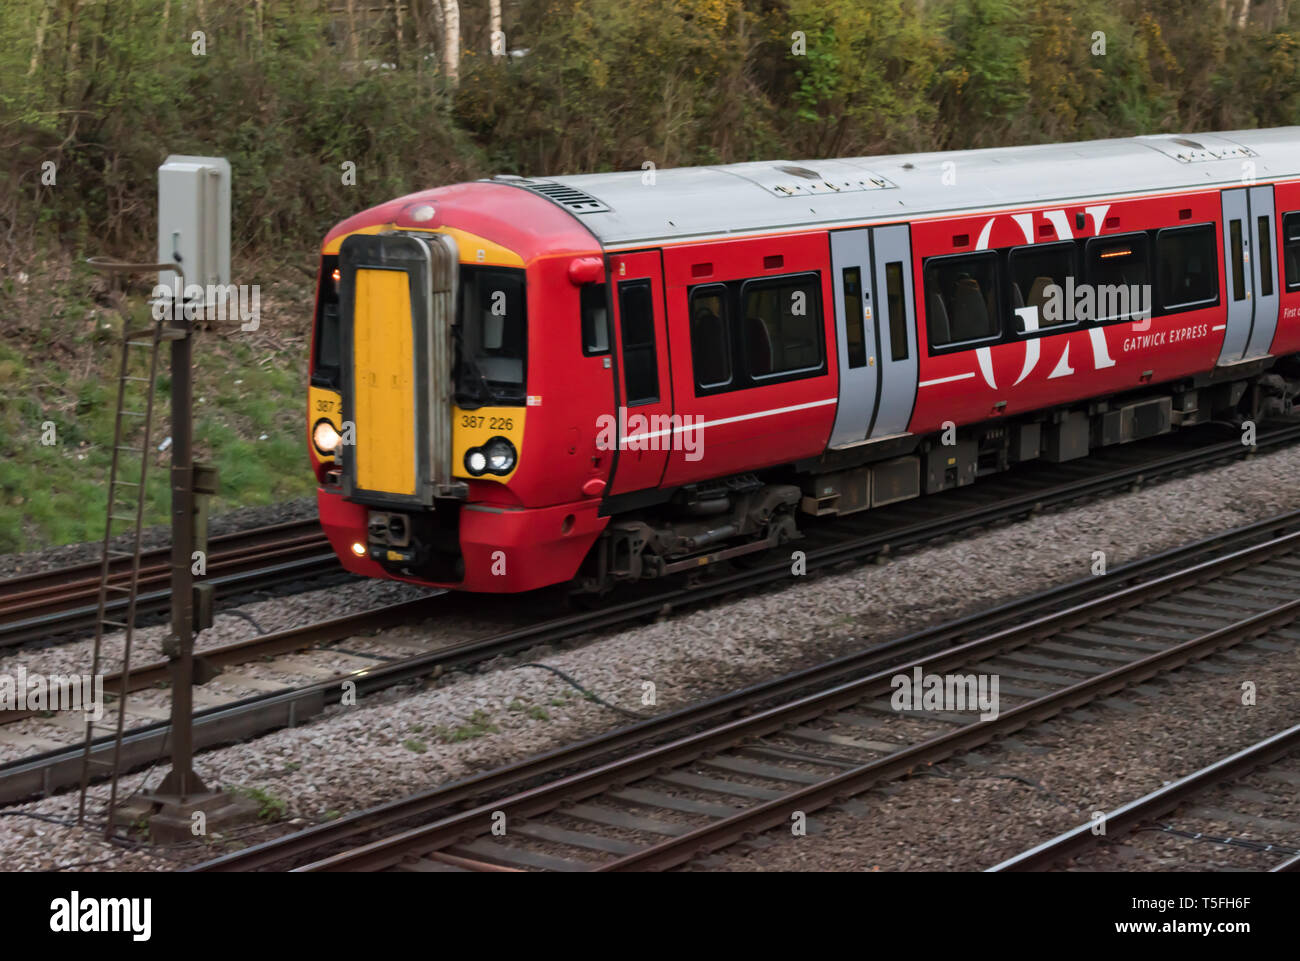 Crawley, West Sussex, UK - April 17 2019: Close up of the front carriage of a Gatwick Express train service as it passes a signal. Stock Photo